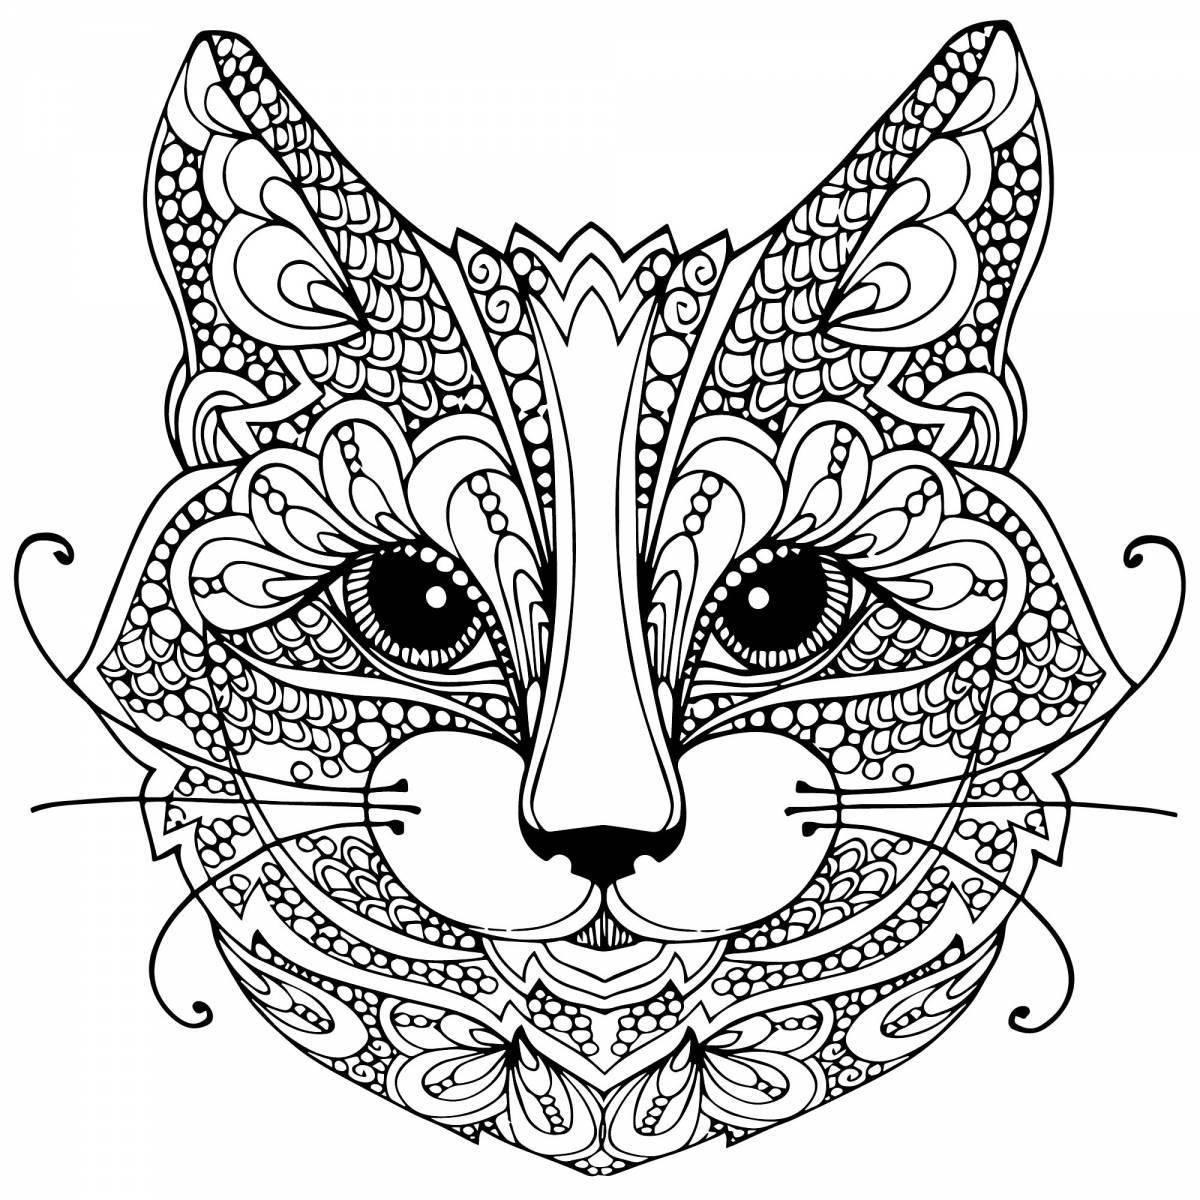 Effective anti-stress coloring book